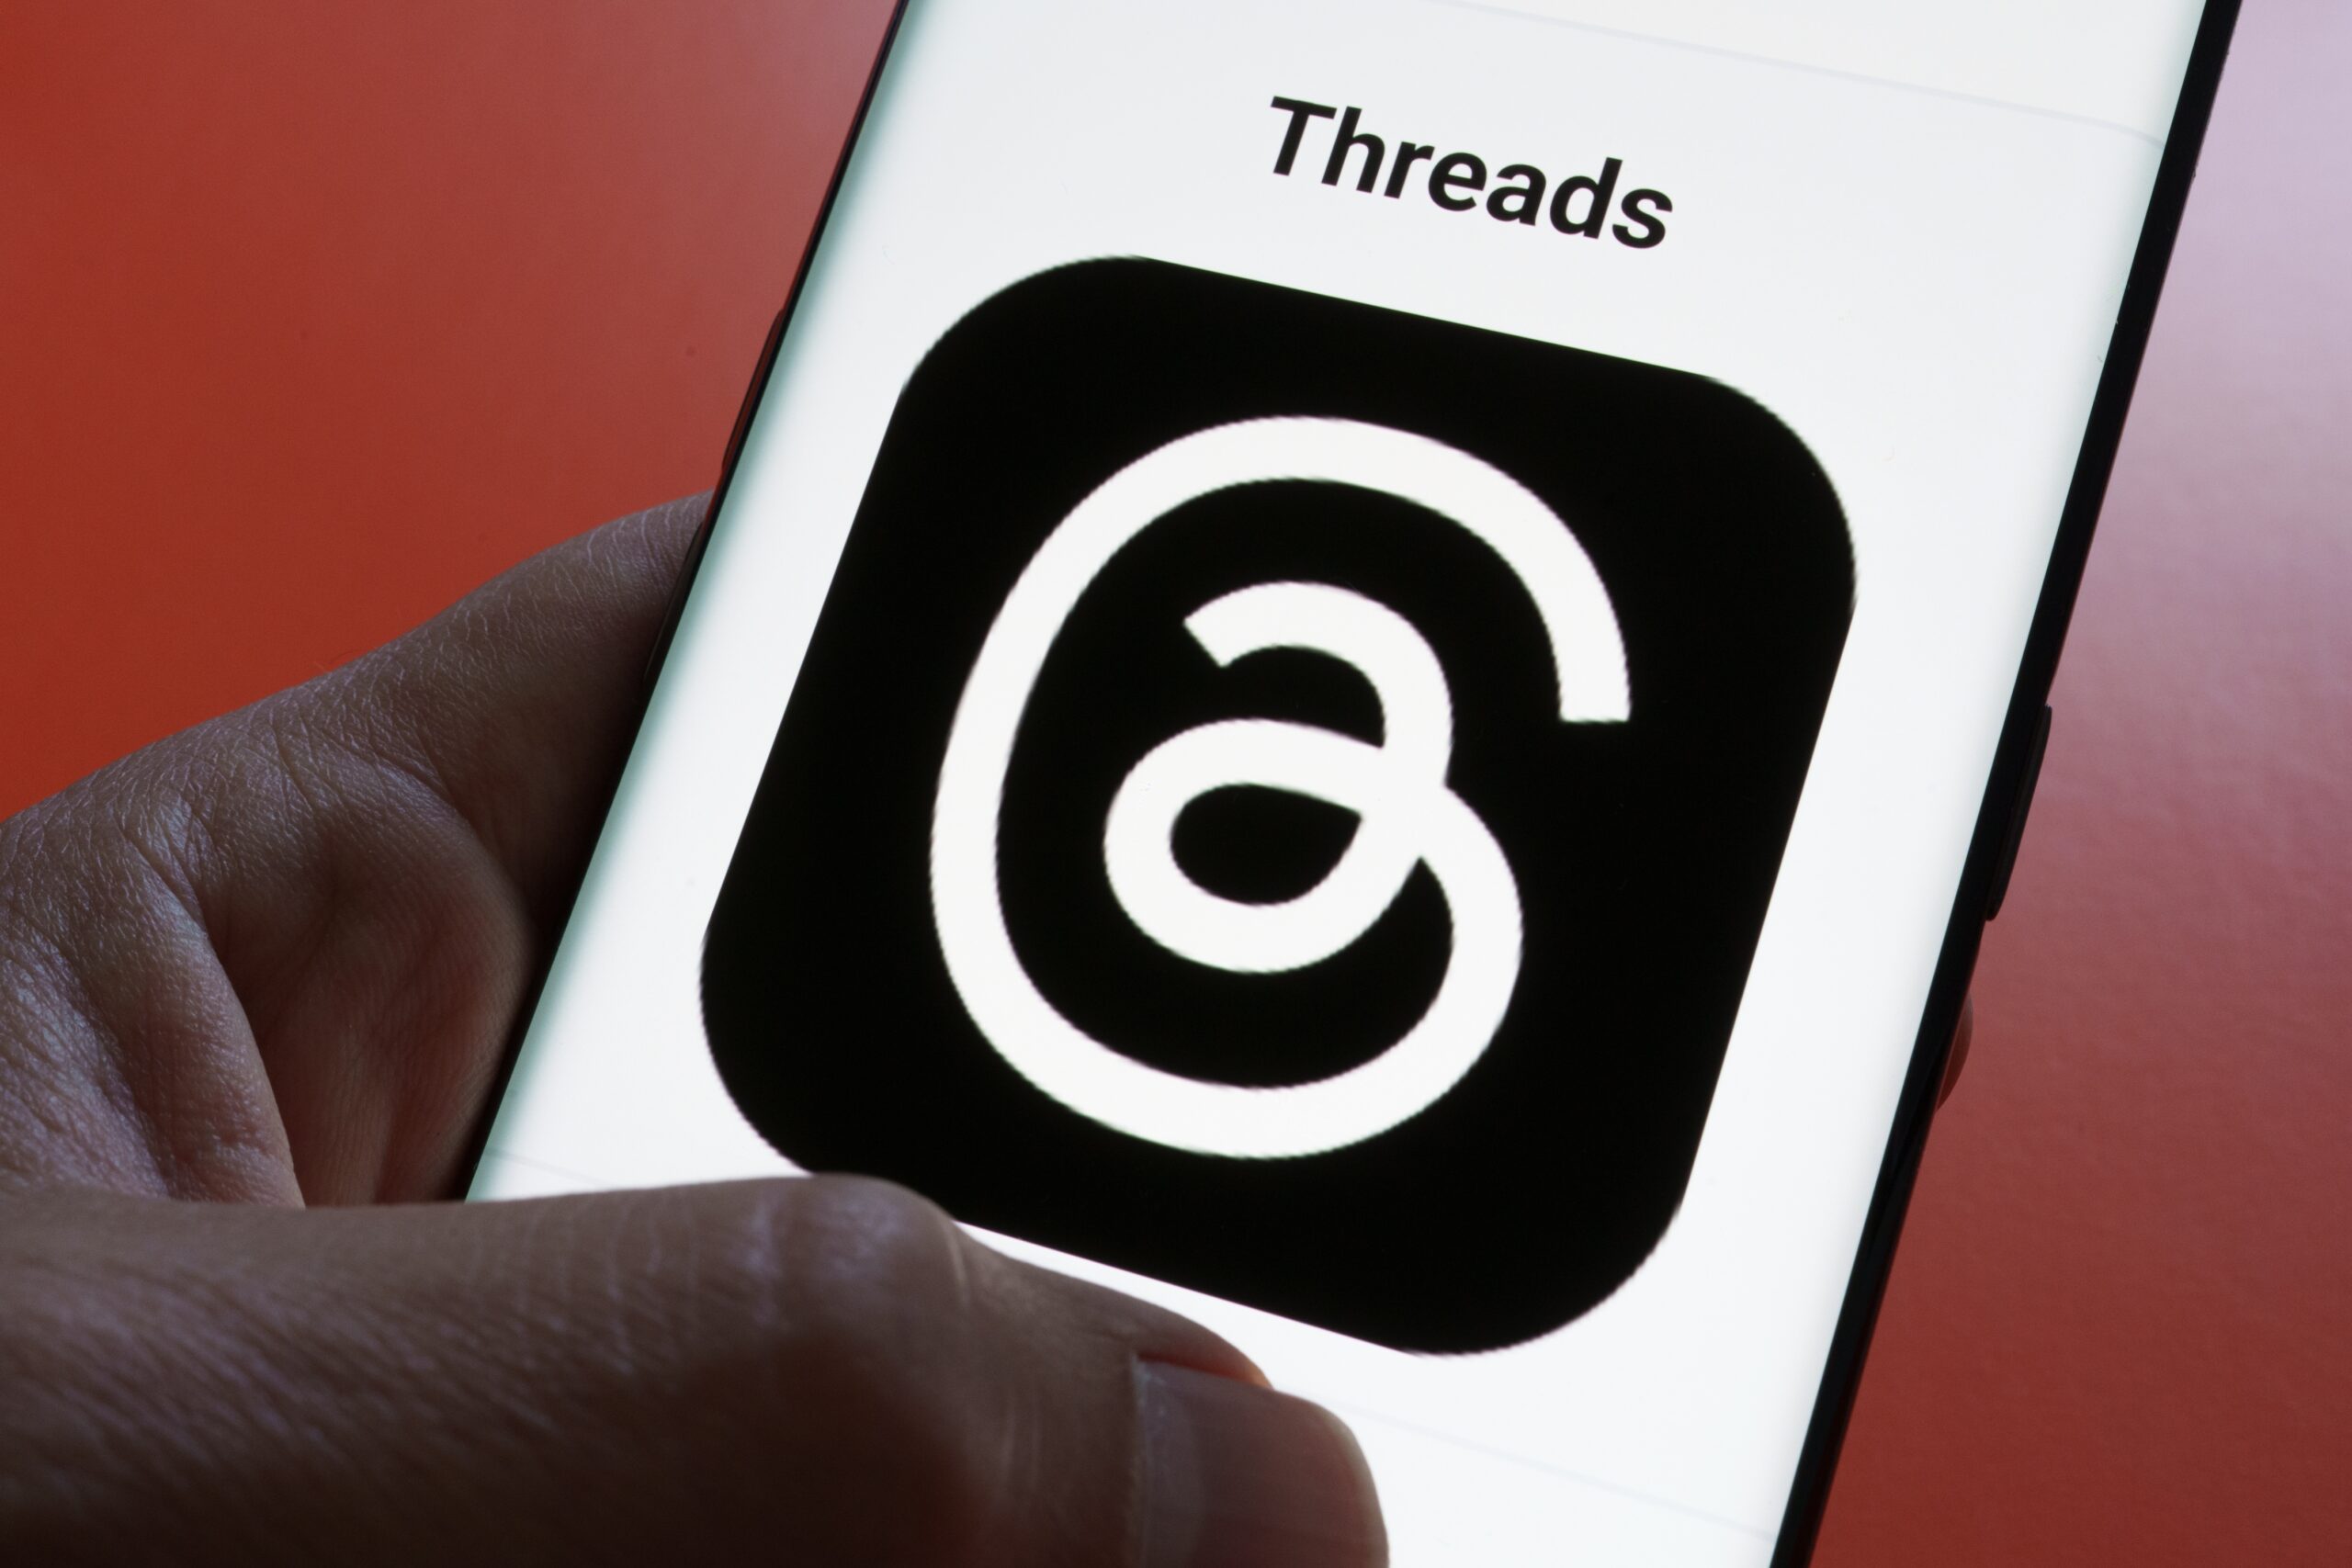 Threads Social Media Platform Expands Horizons with Mobile Web Browser Launch